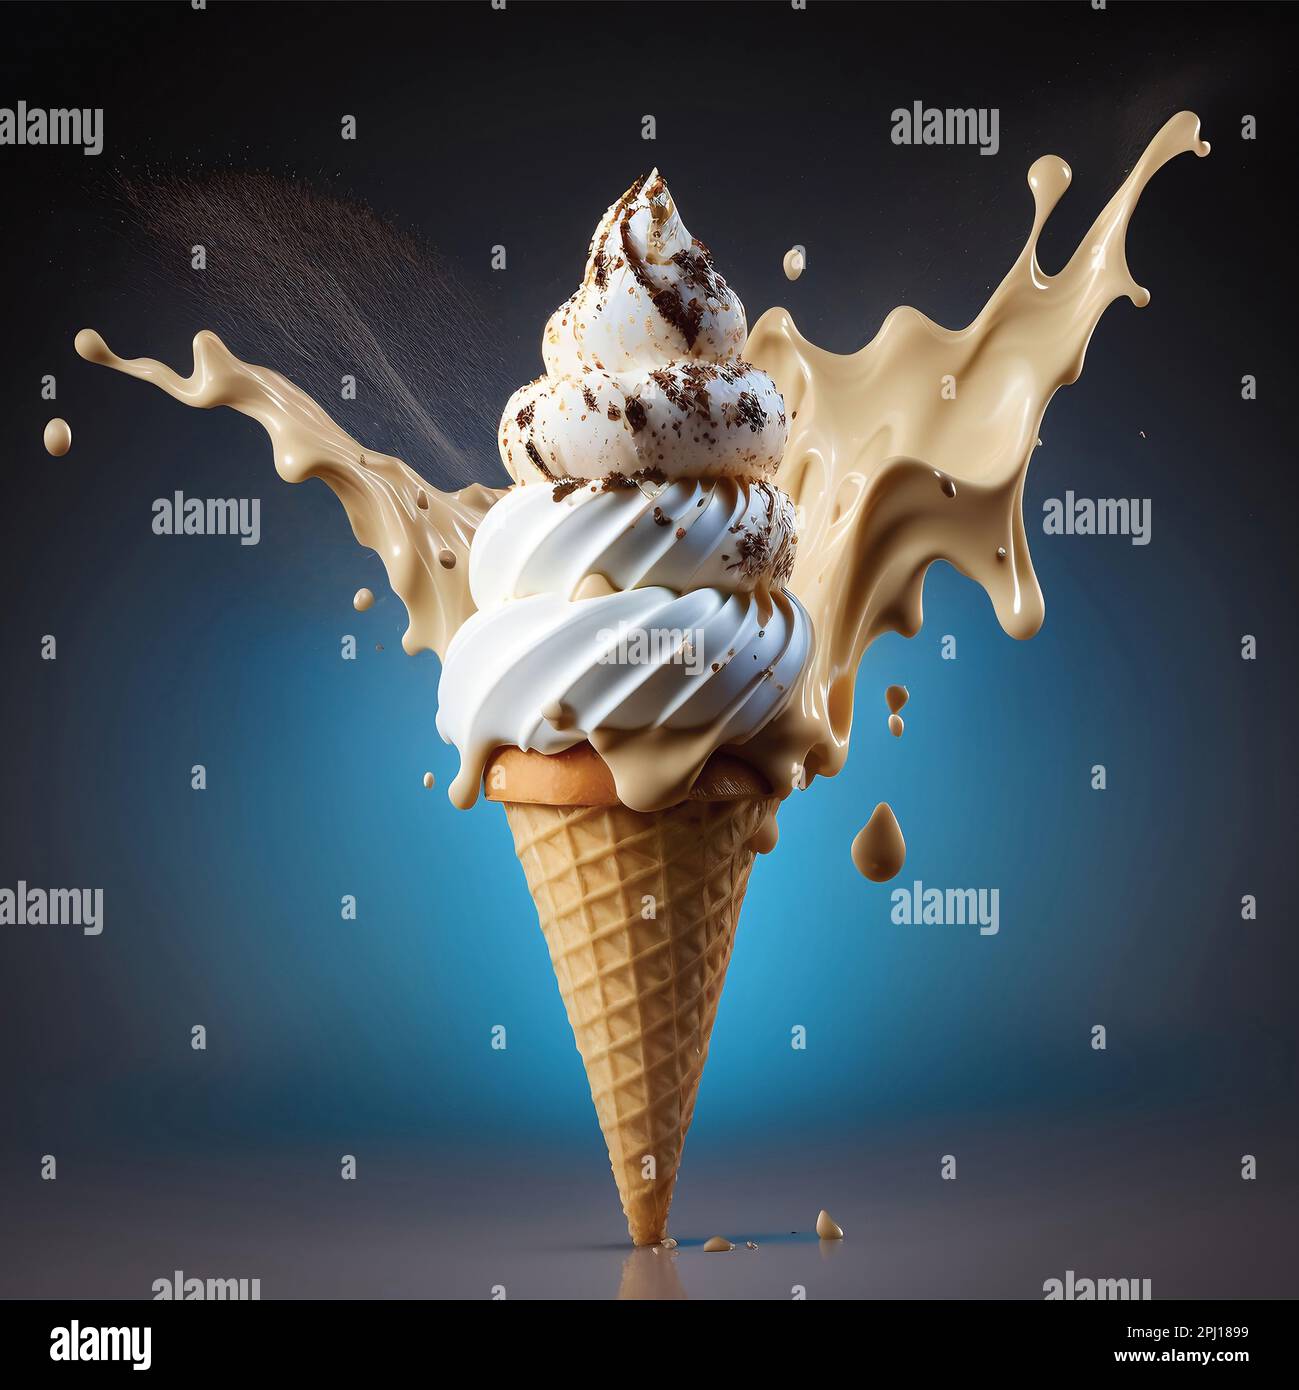 Delicious ice cream cone with chocolate toppings png download